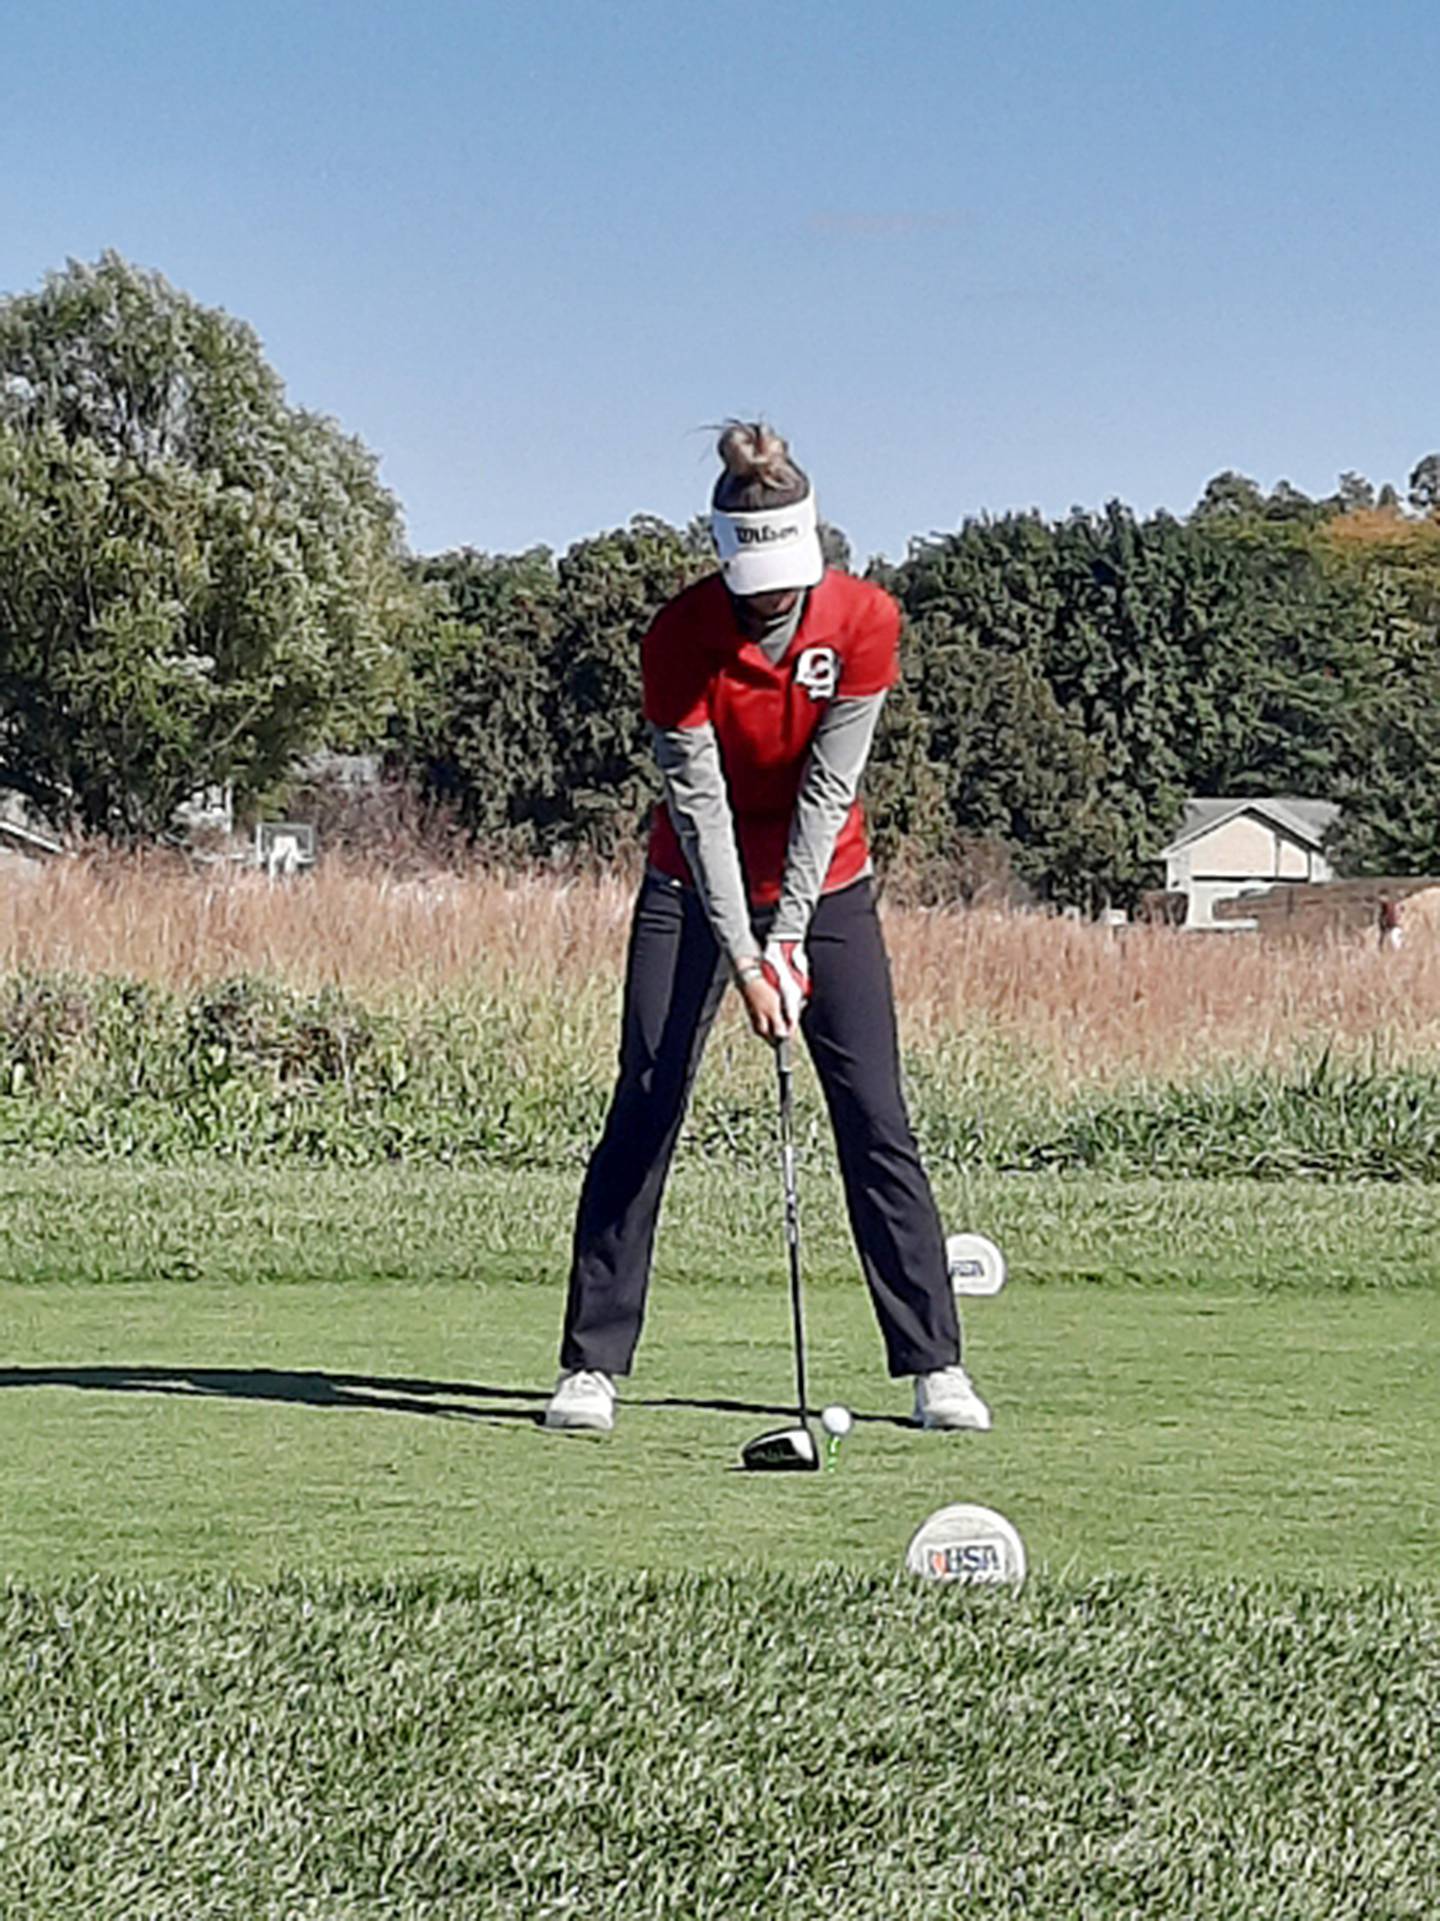 Oregon senior Ava Hackman gets ready to tee off during the Class 1A State Tournament on Saturday, Oct. 8, 2022 at Red Tail Run Golf Course in Decatur. Hackman tied for 21st with a two-day total of 15-over-par 159.